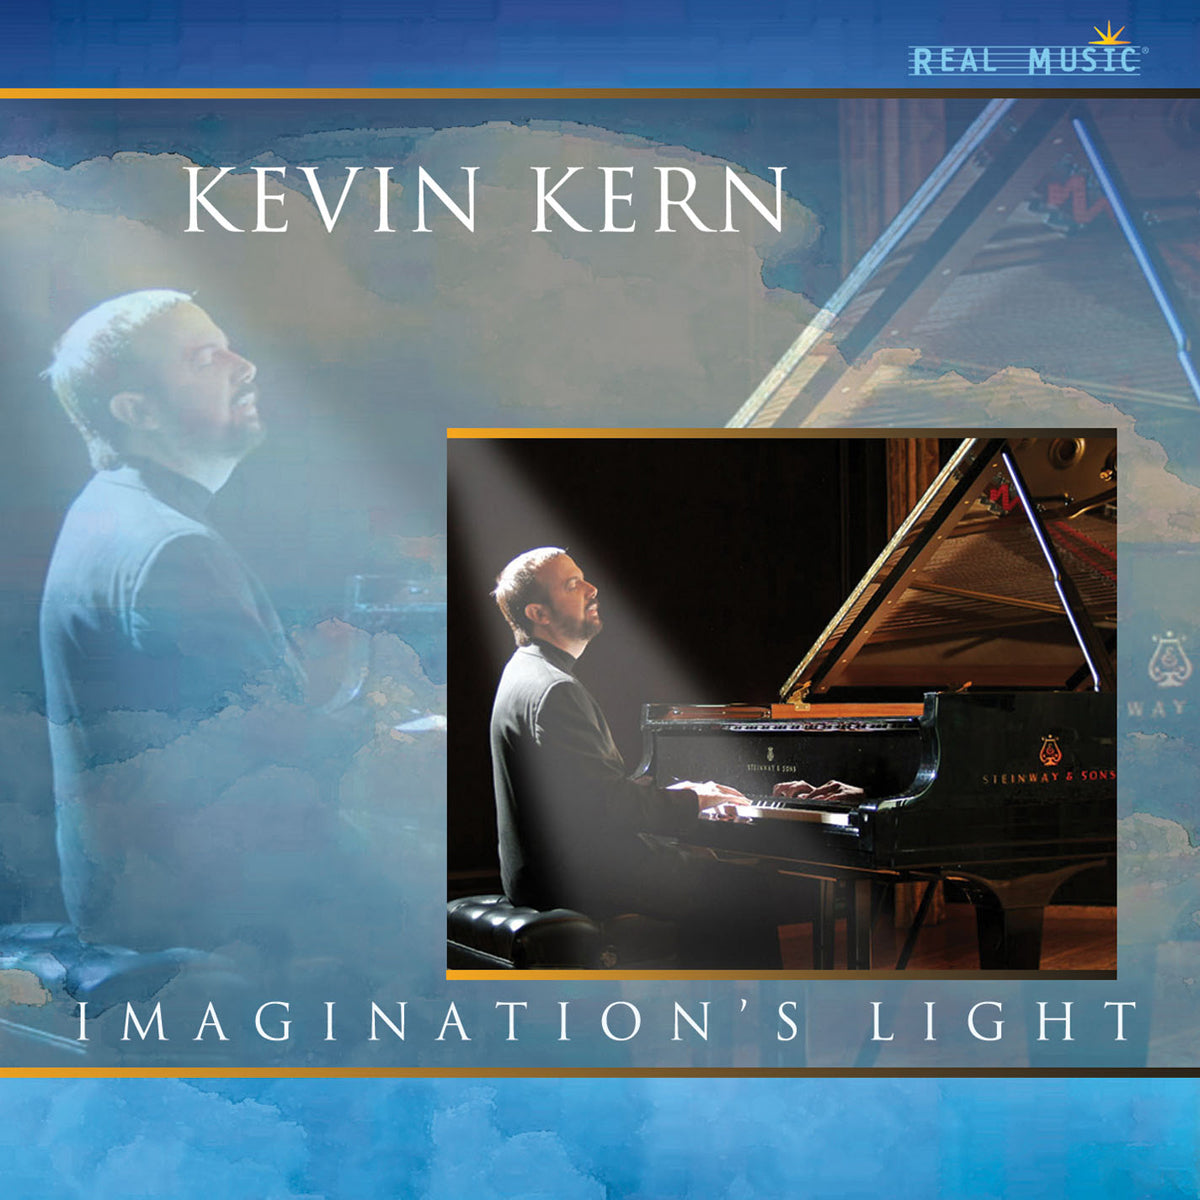 Imaginations Light by Kevin Kern, CD cover art